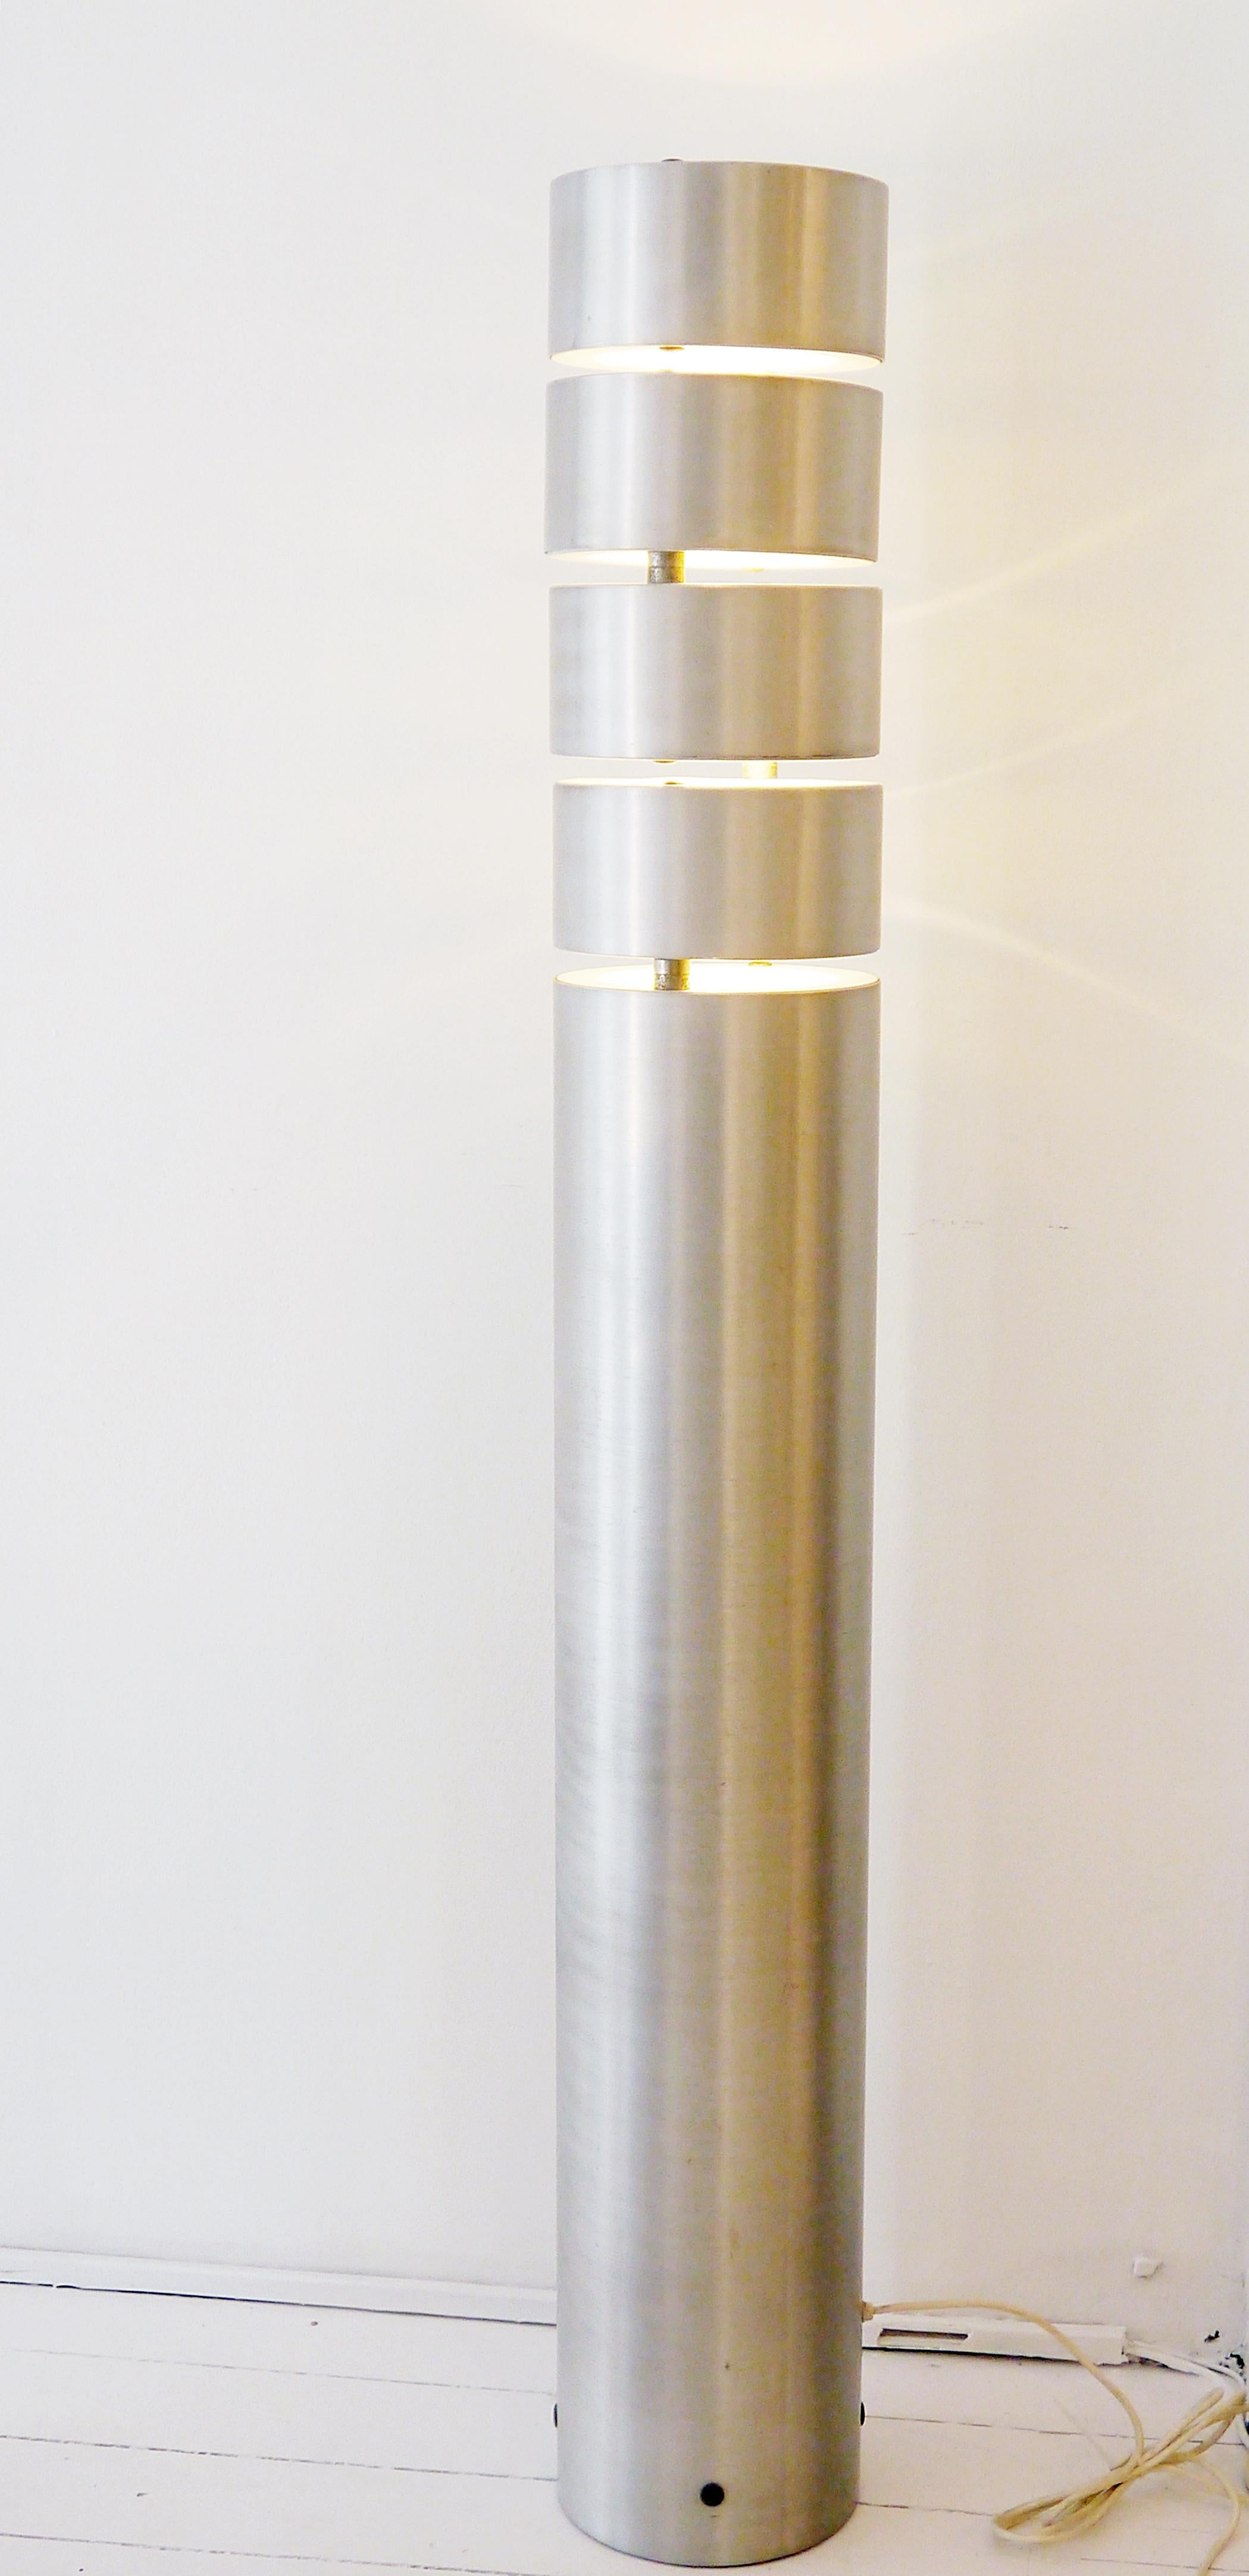 Late 20th Century Brushed Metal Floor Lamp by Stilux, Milano 1972